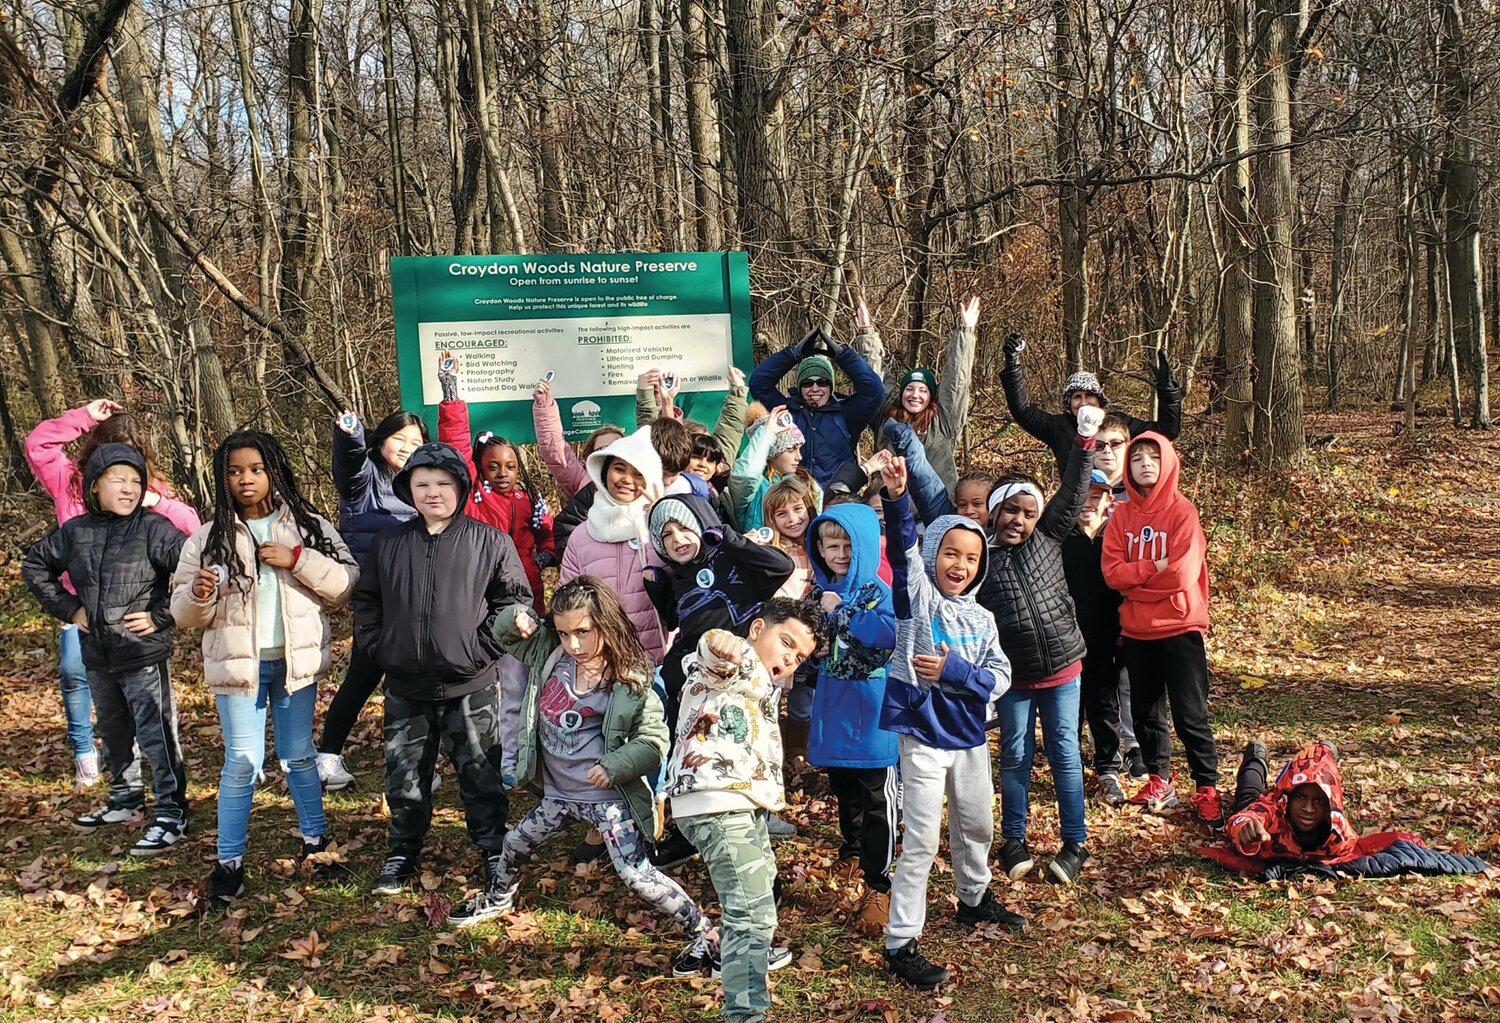 Fourth and second graders enrolled in the Guardian Tree Program at Keystone Elementary School strike their guardian poses after protecting native seedlings in Croydon Woods Nature Preserve.